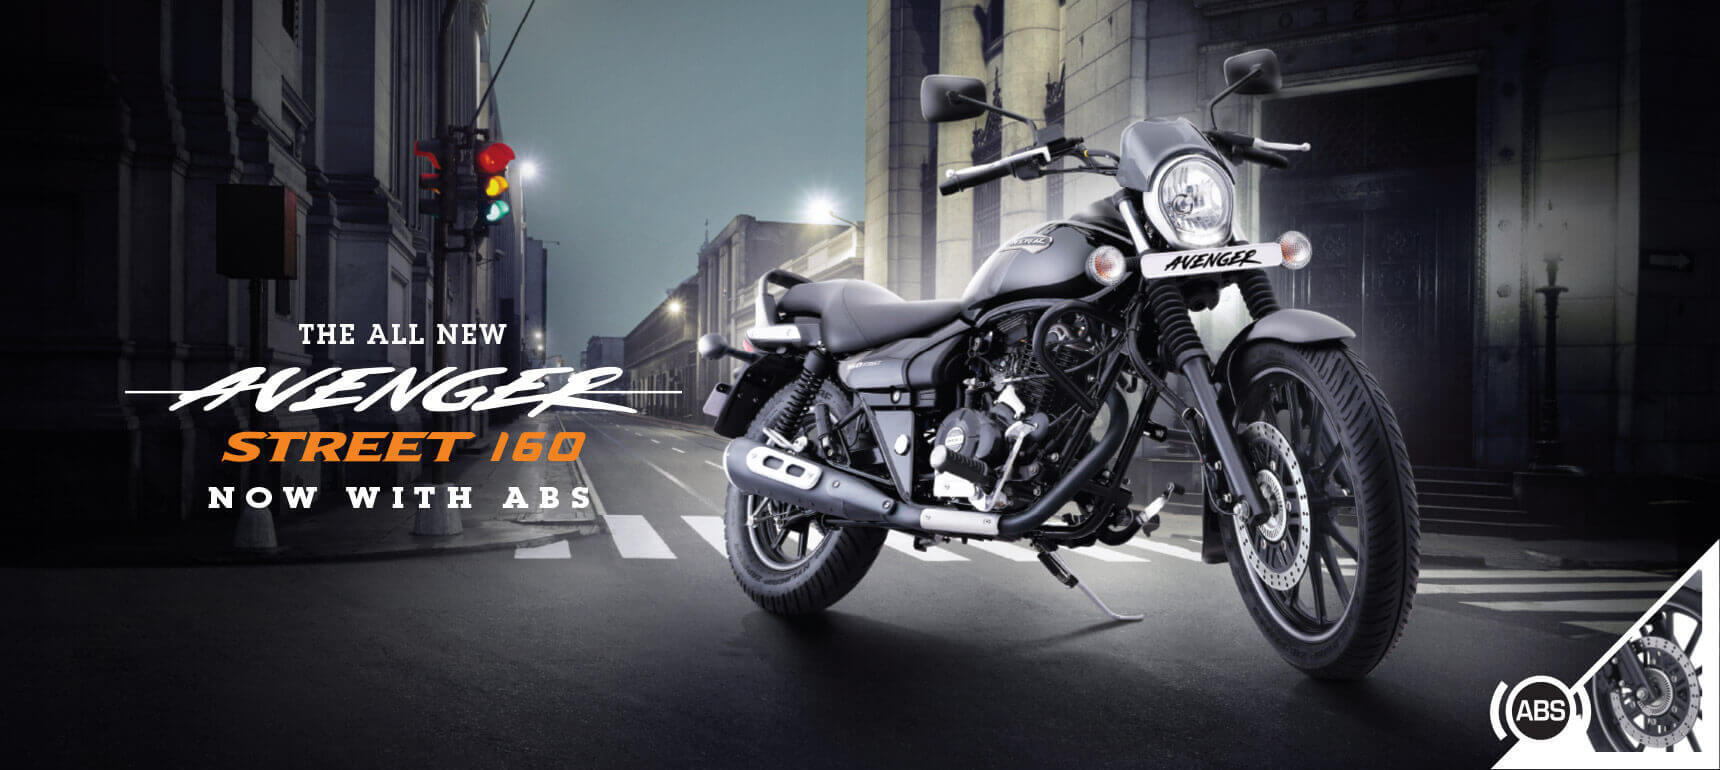 Bajaj-Avenger-160-Street-Now-with-ABS-Product-Banner